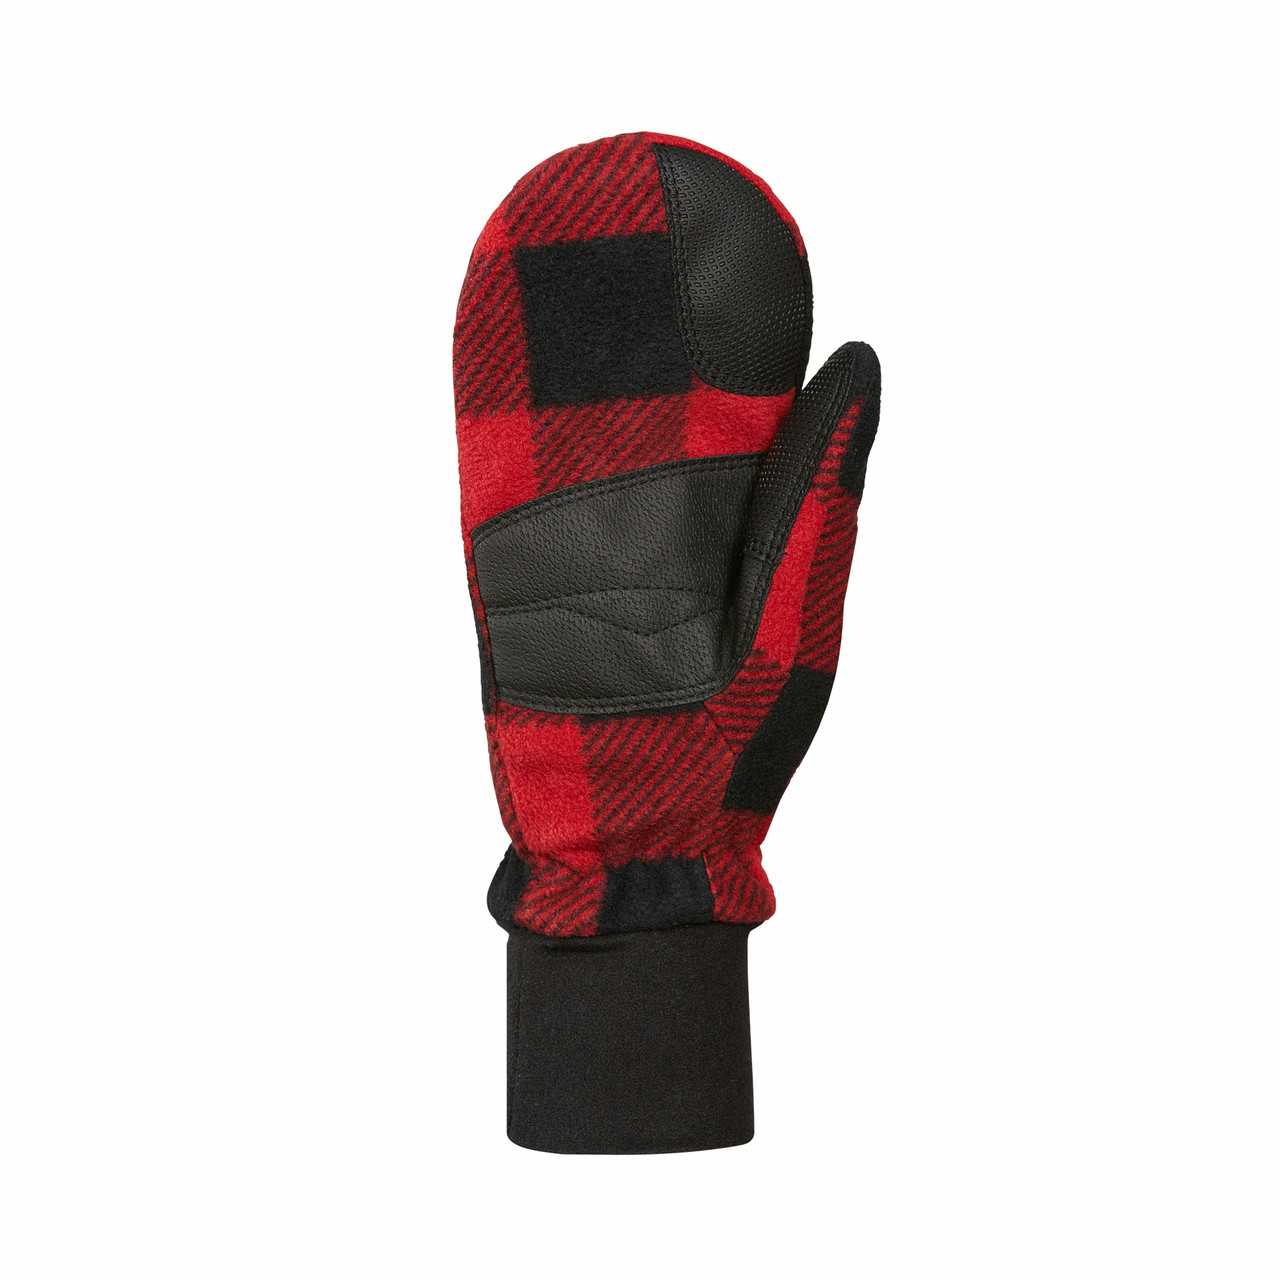 The Windguardian Mitts Red Buffalo Plaid